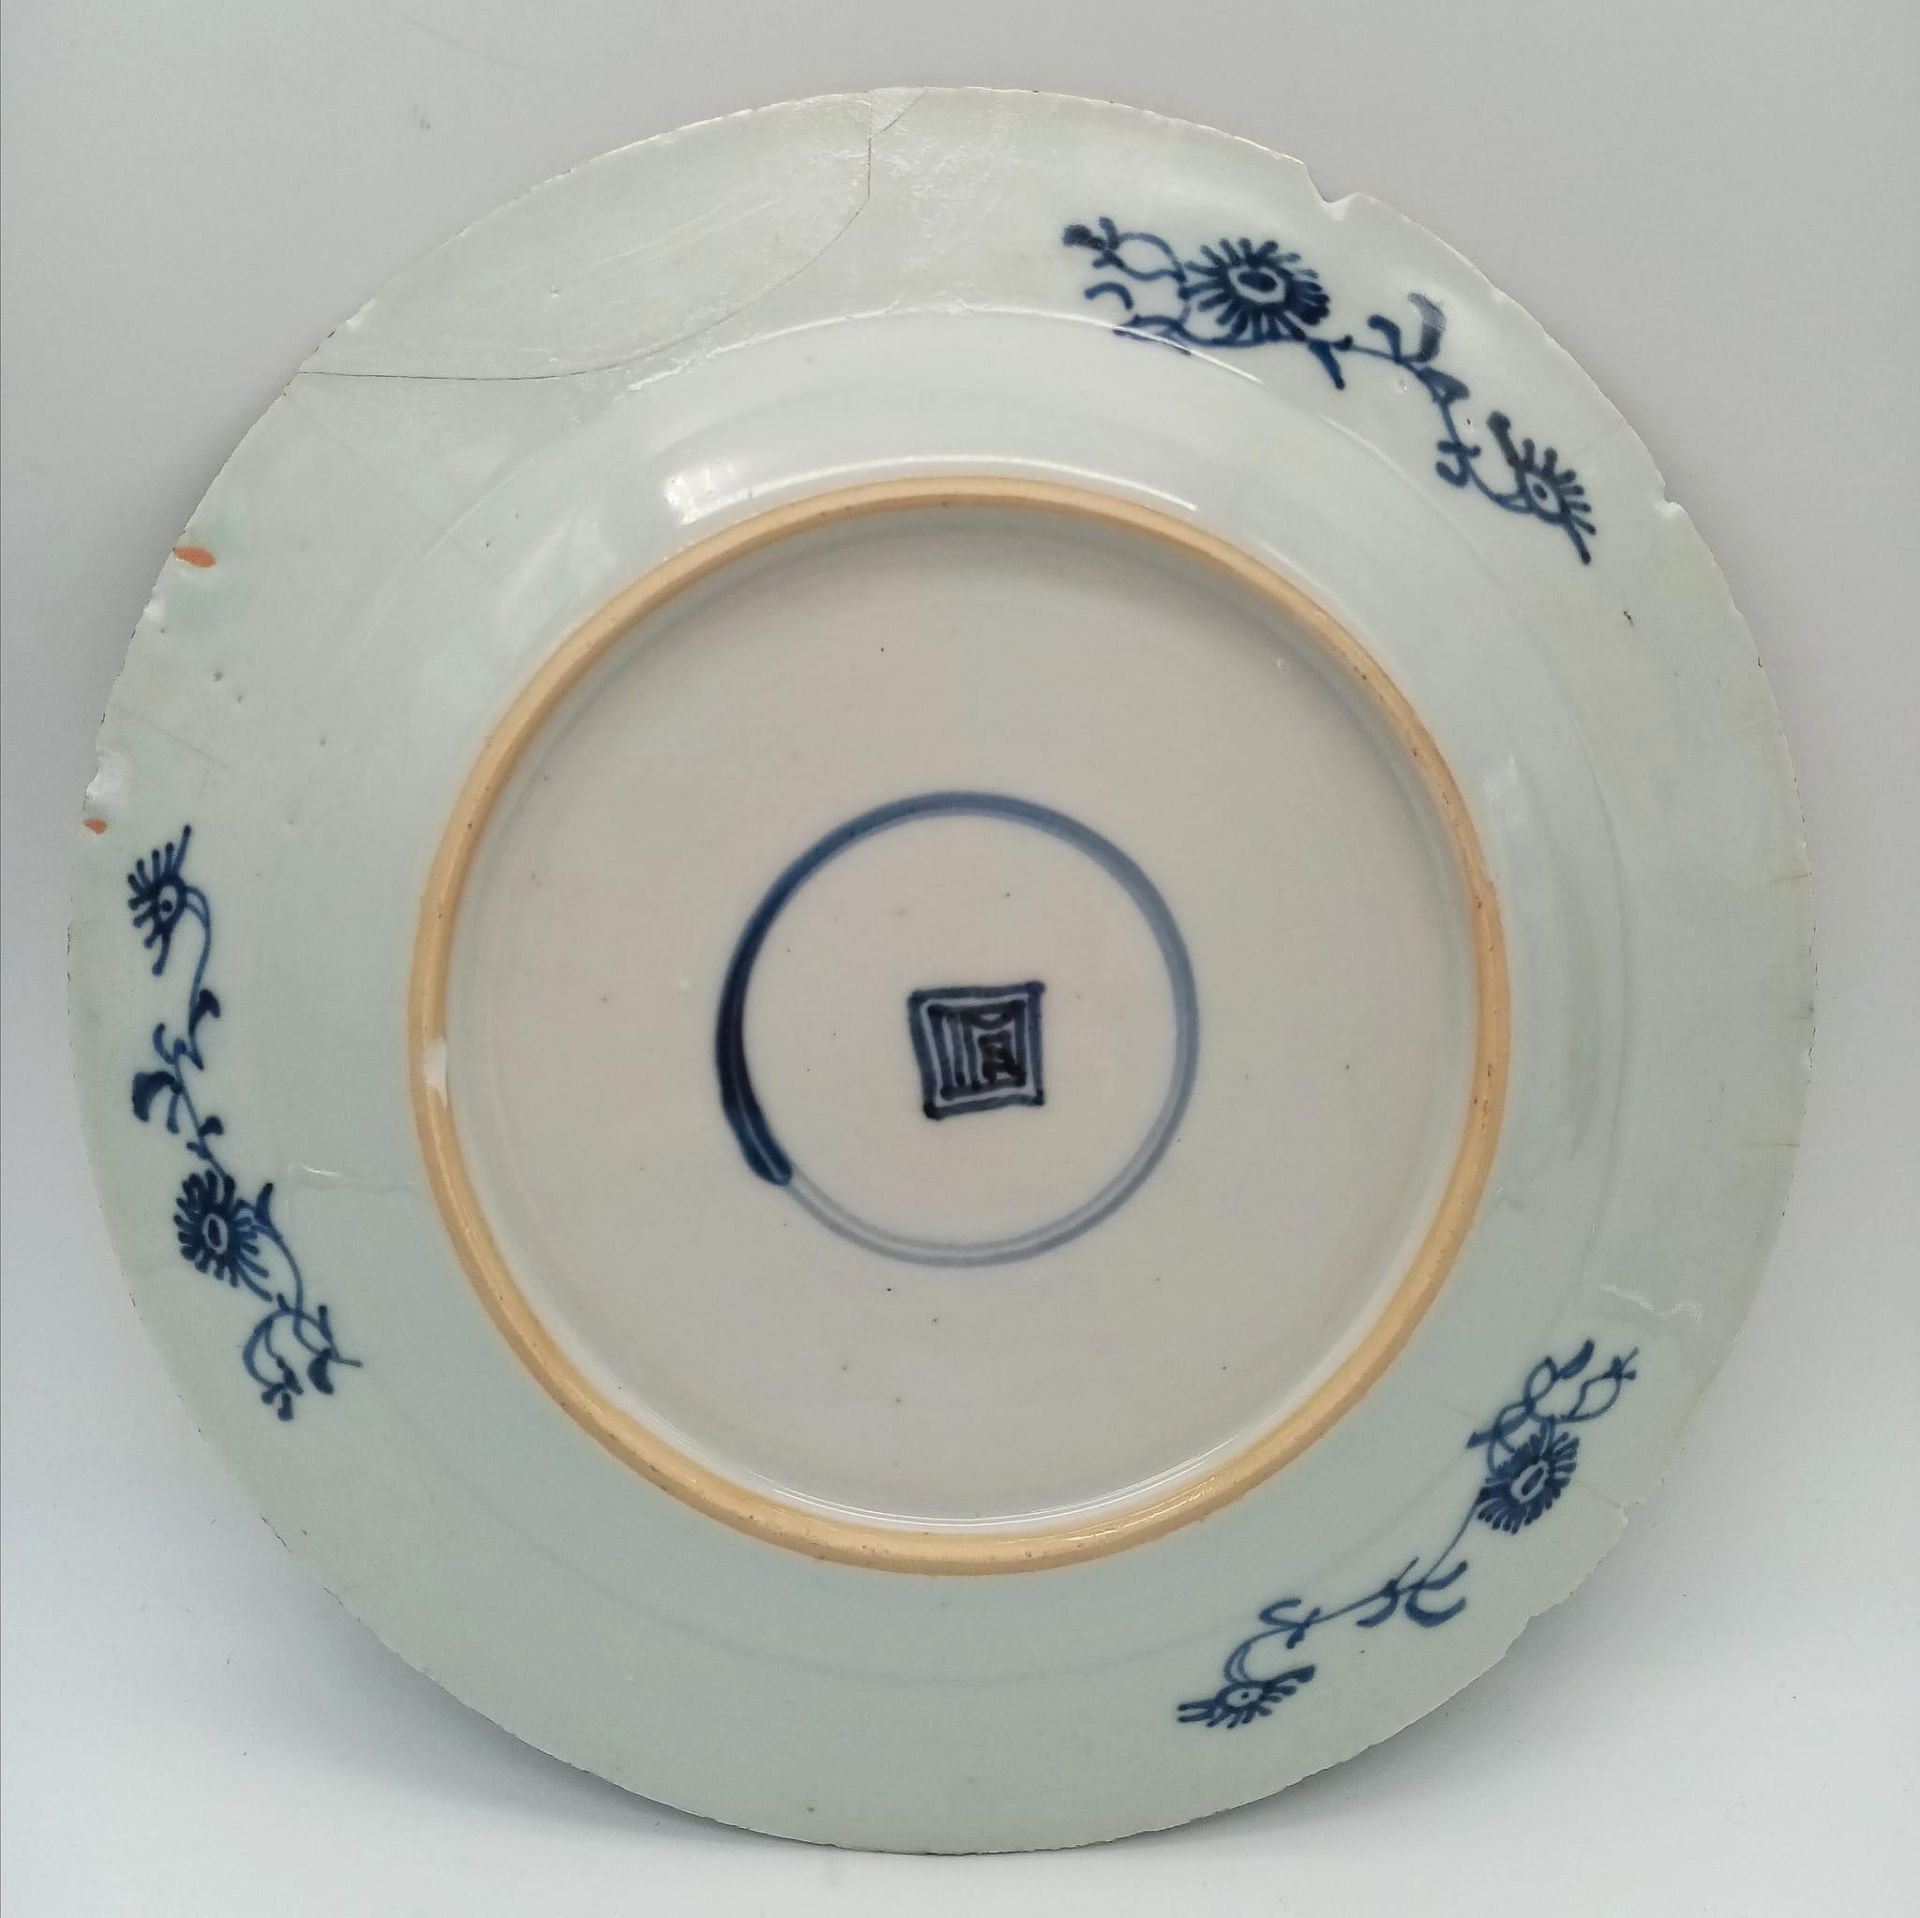 An 18th Century Chinese Blue and White Ceramic Plate. Has been repaired so a/f. - Image 2 of 4